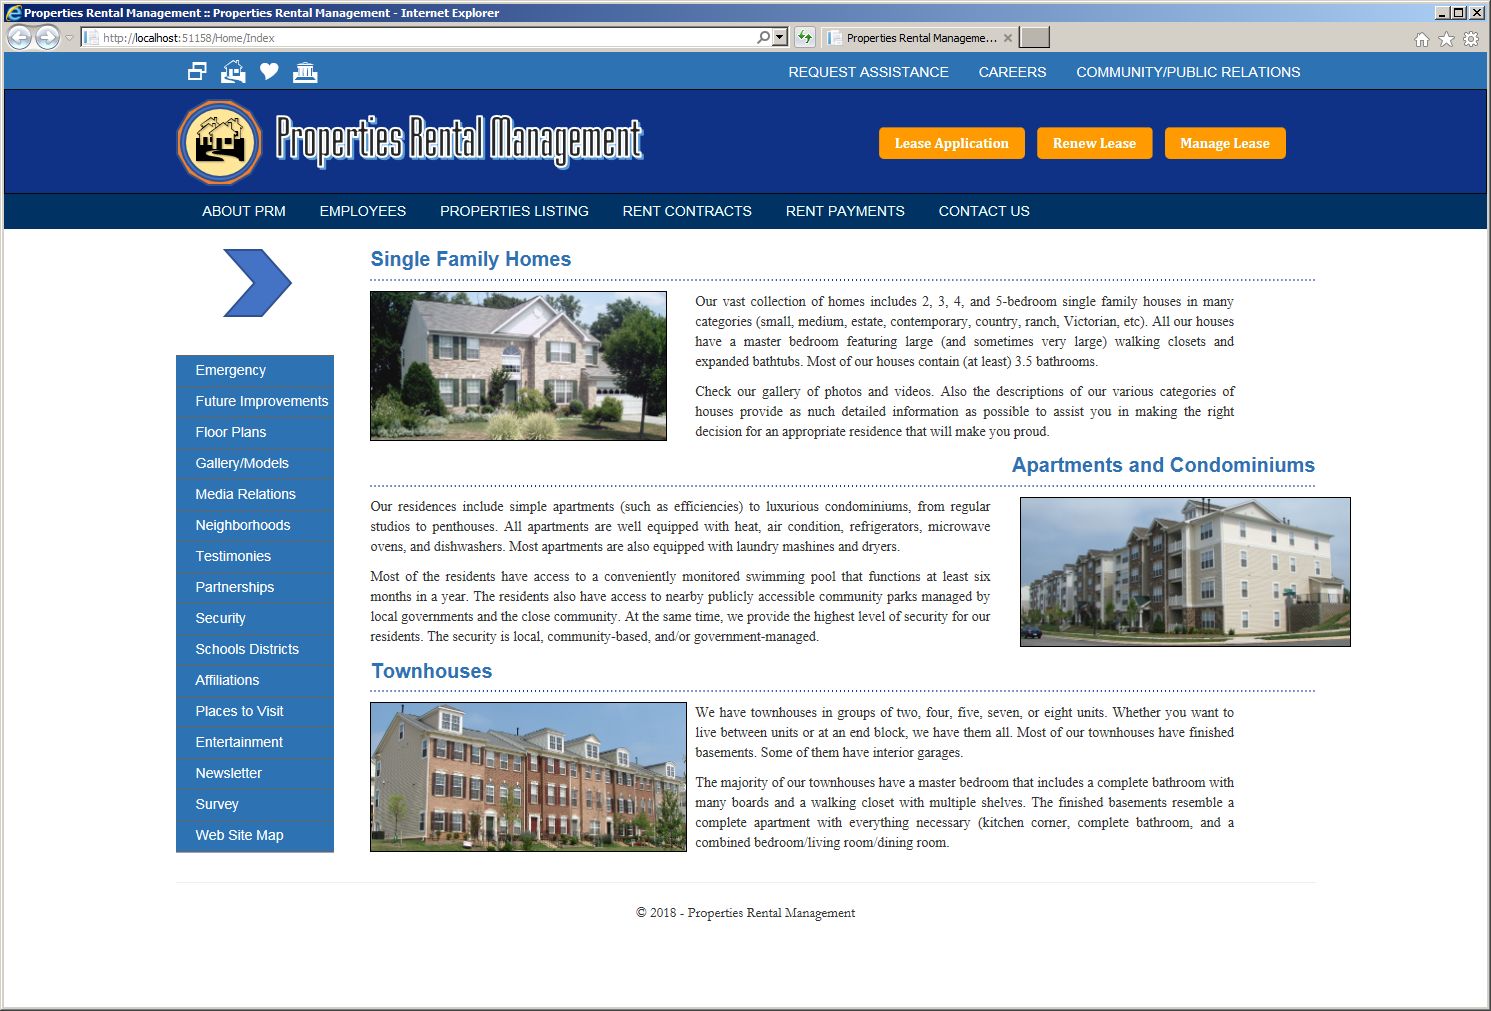 Properties Rental Management - Home Page